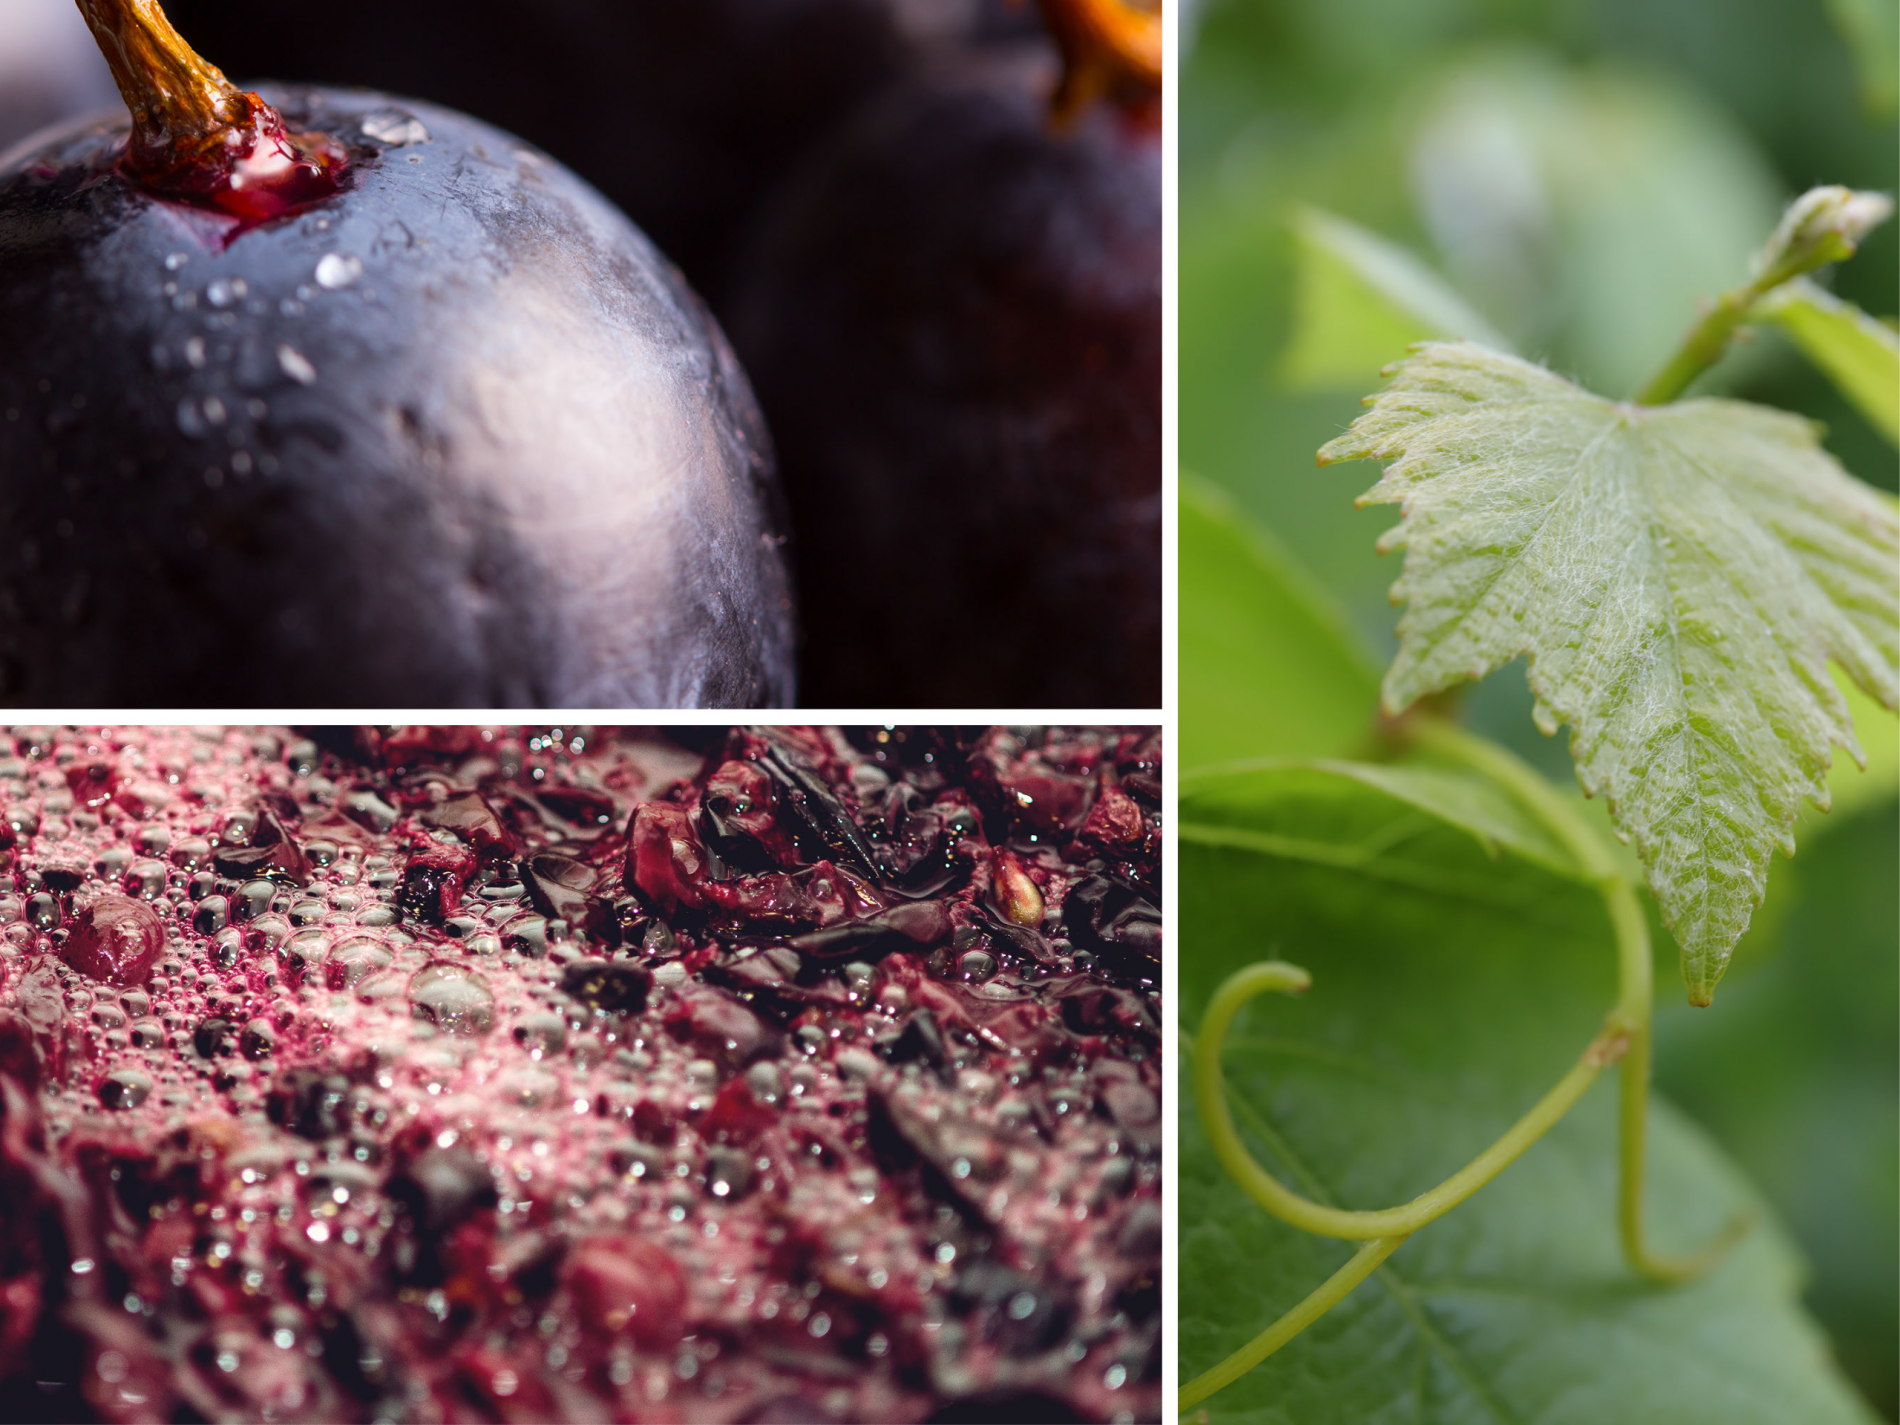 The OIV together with leading grape and wine companies teams up for research